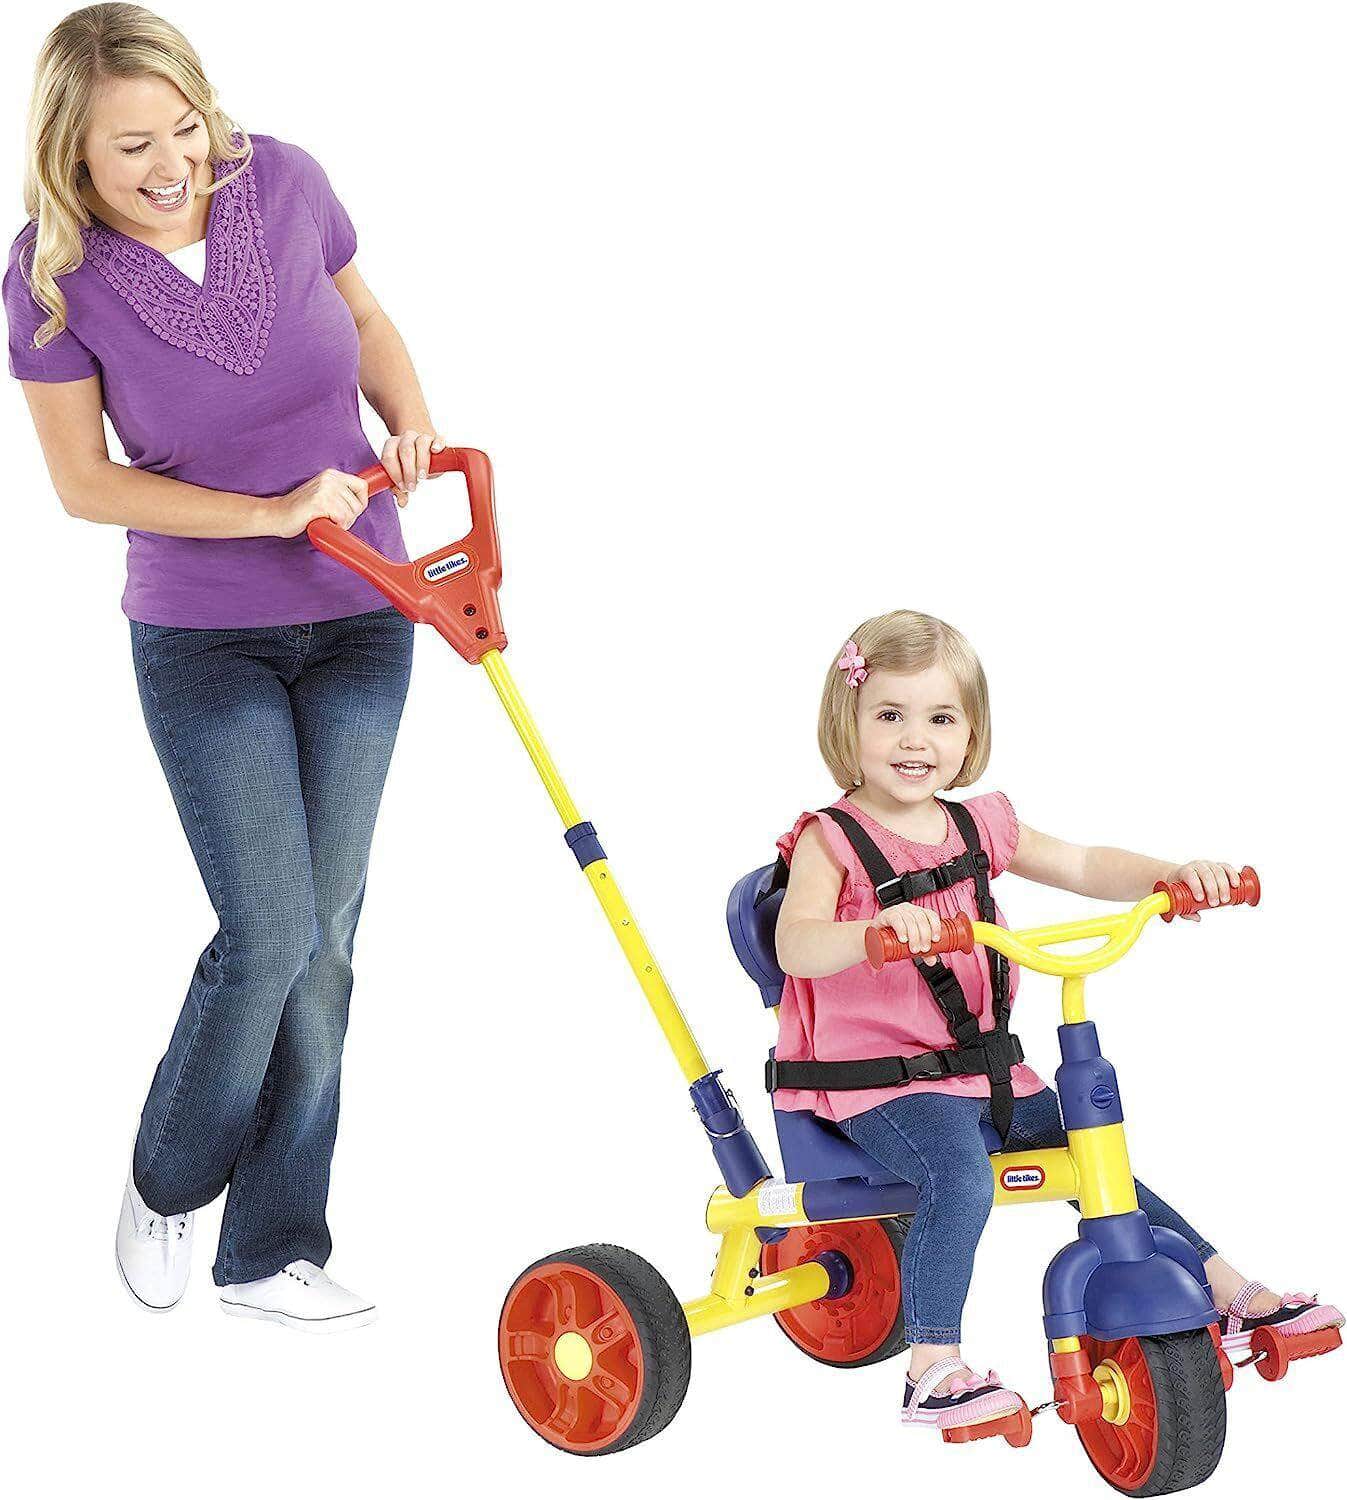 Little Tikes 3-in-1 Trike: Fun and Learning on Wheels